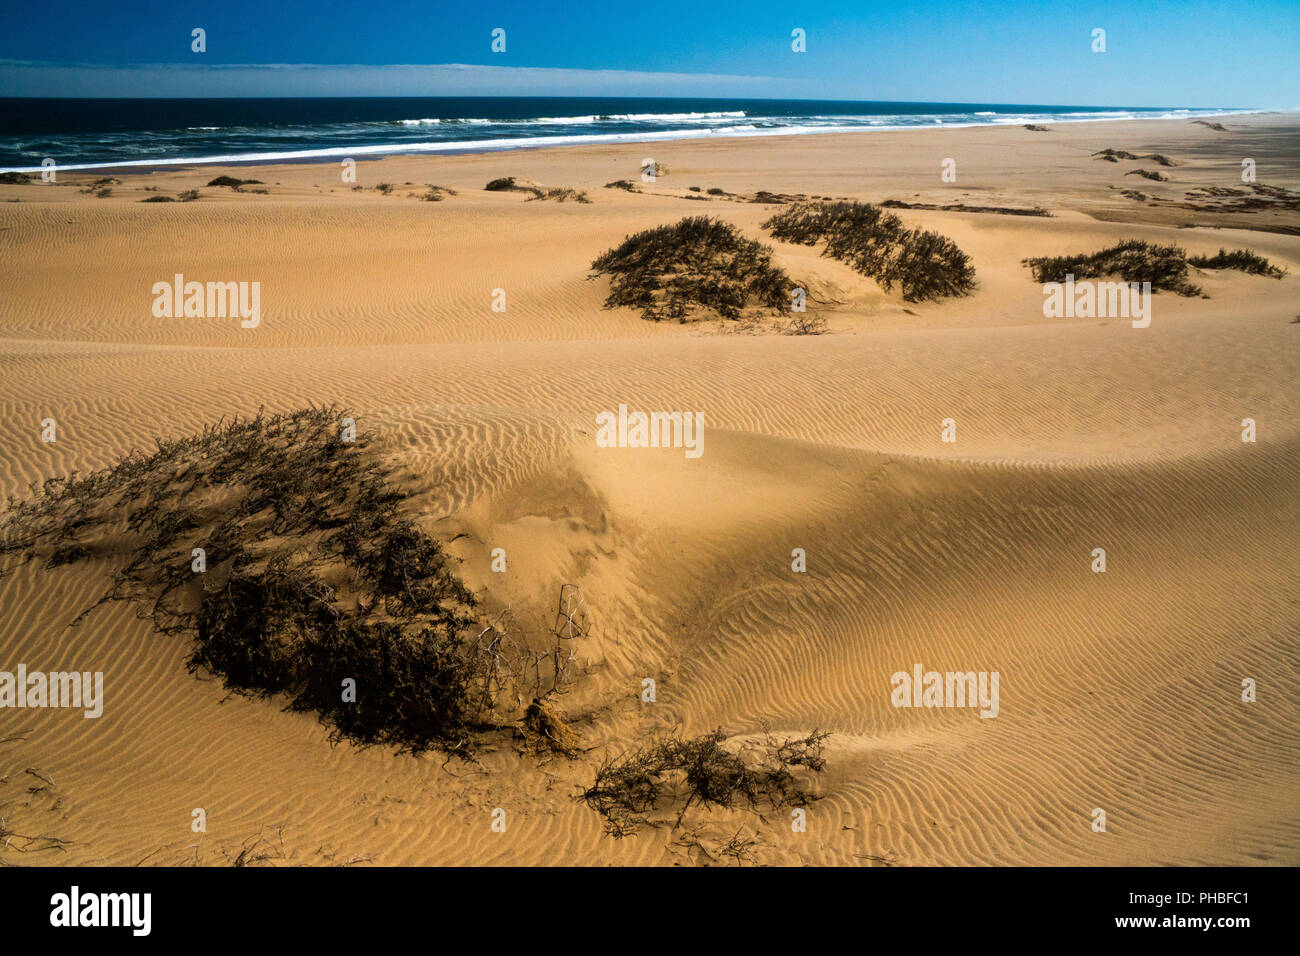 Sand dunes, blown by wind into pronounced furrows stretching into the distance by the sea and surf, near Sandwich Bay, Namibia, Africa Stock Photo